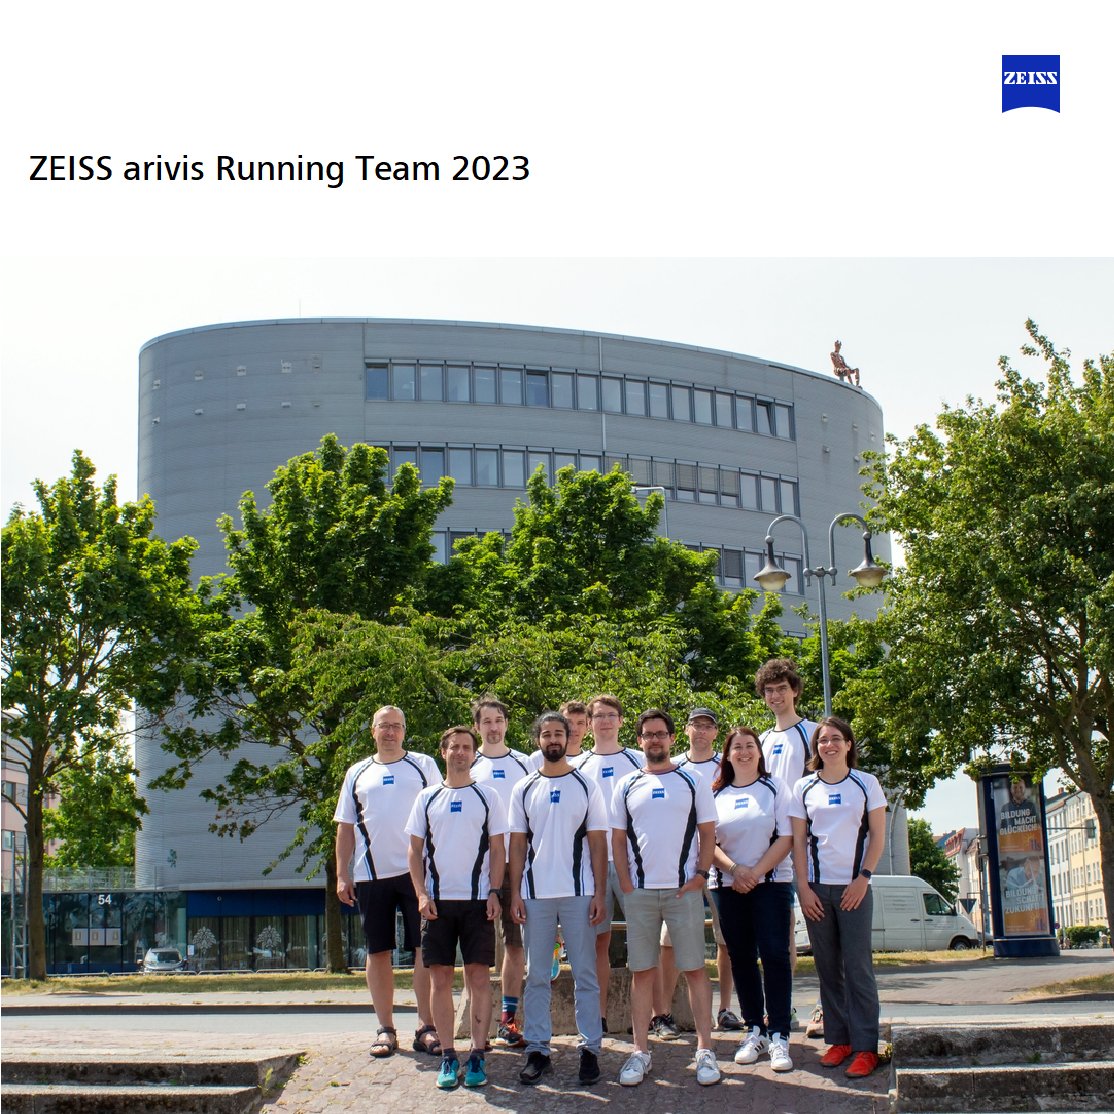 ZEISS arivis running team will participate in the Rostocker Firmenlauf on June 21, 2023. 

With a strong belief that a healthy mind resides in a healthy body, we encourage our employees to stay active and participate in sports- and community-related initiatives. #Teambuilding